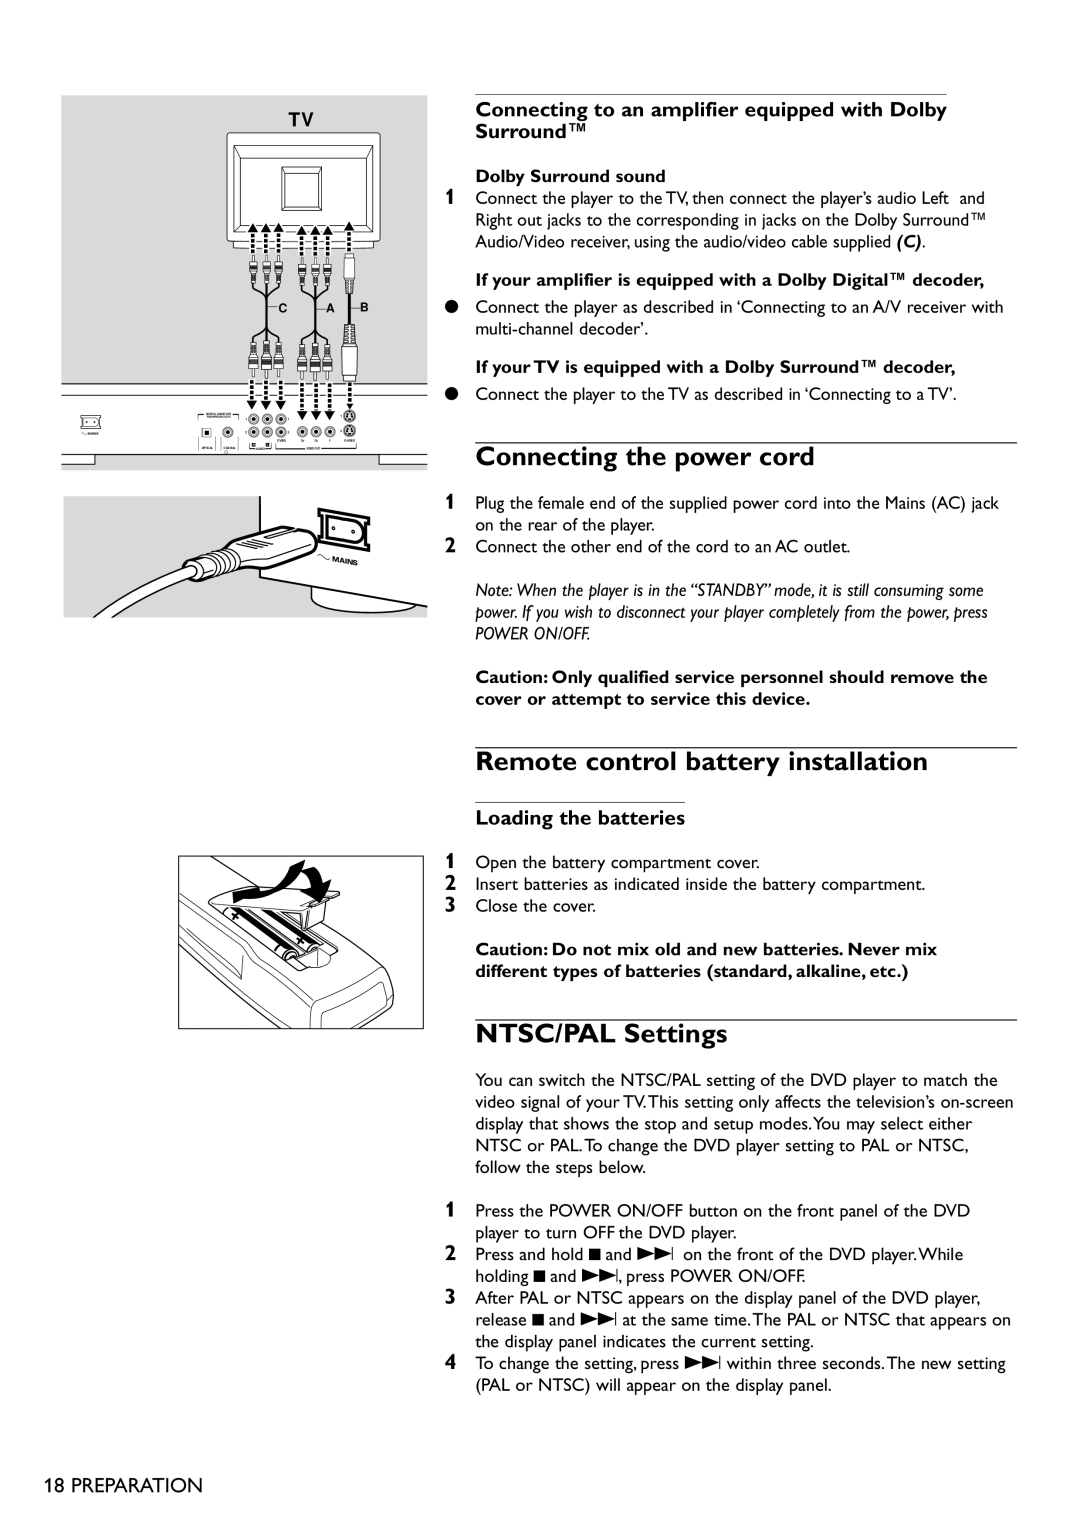 Philips DVD751 manual Connecting the power cord, Remote control battery installation, NTSC/PAL Settings, Preparation 